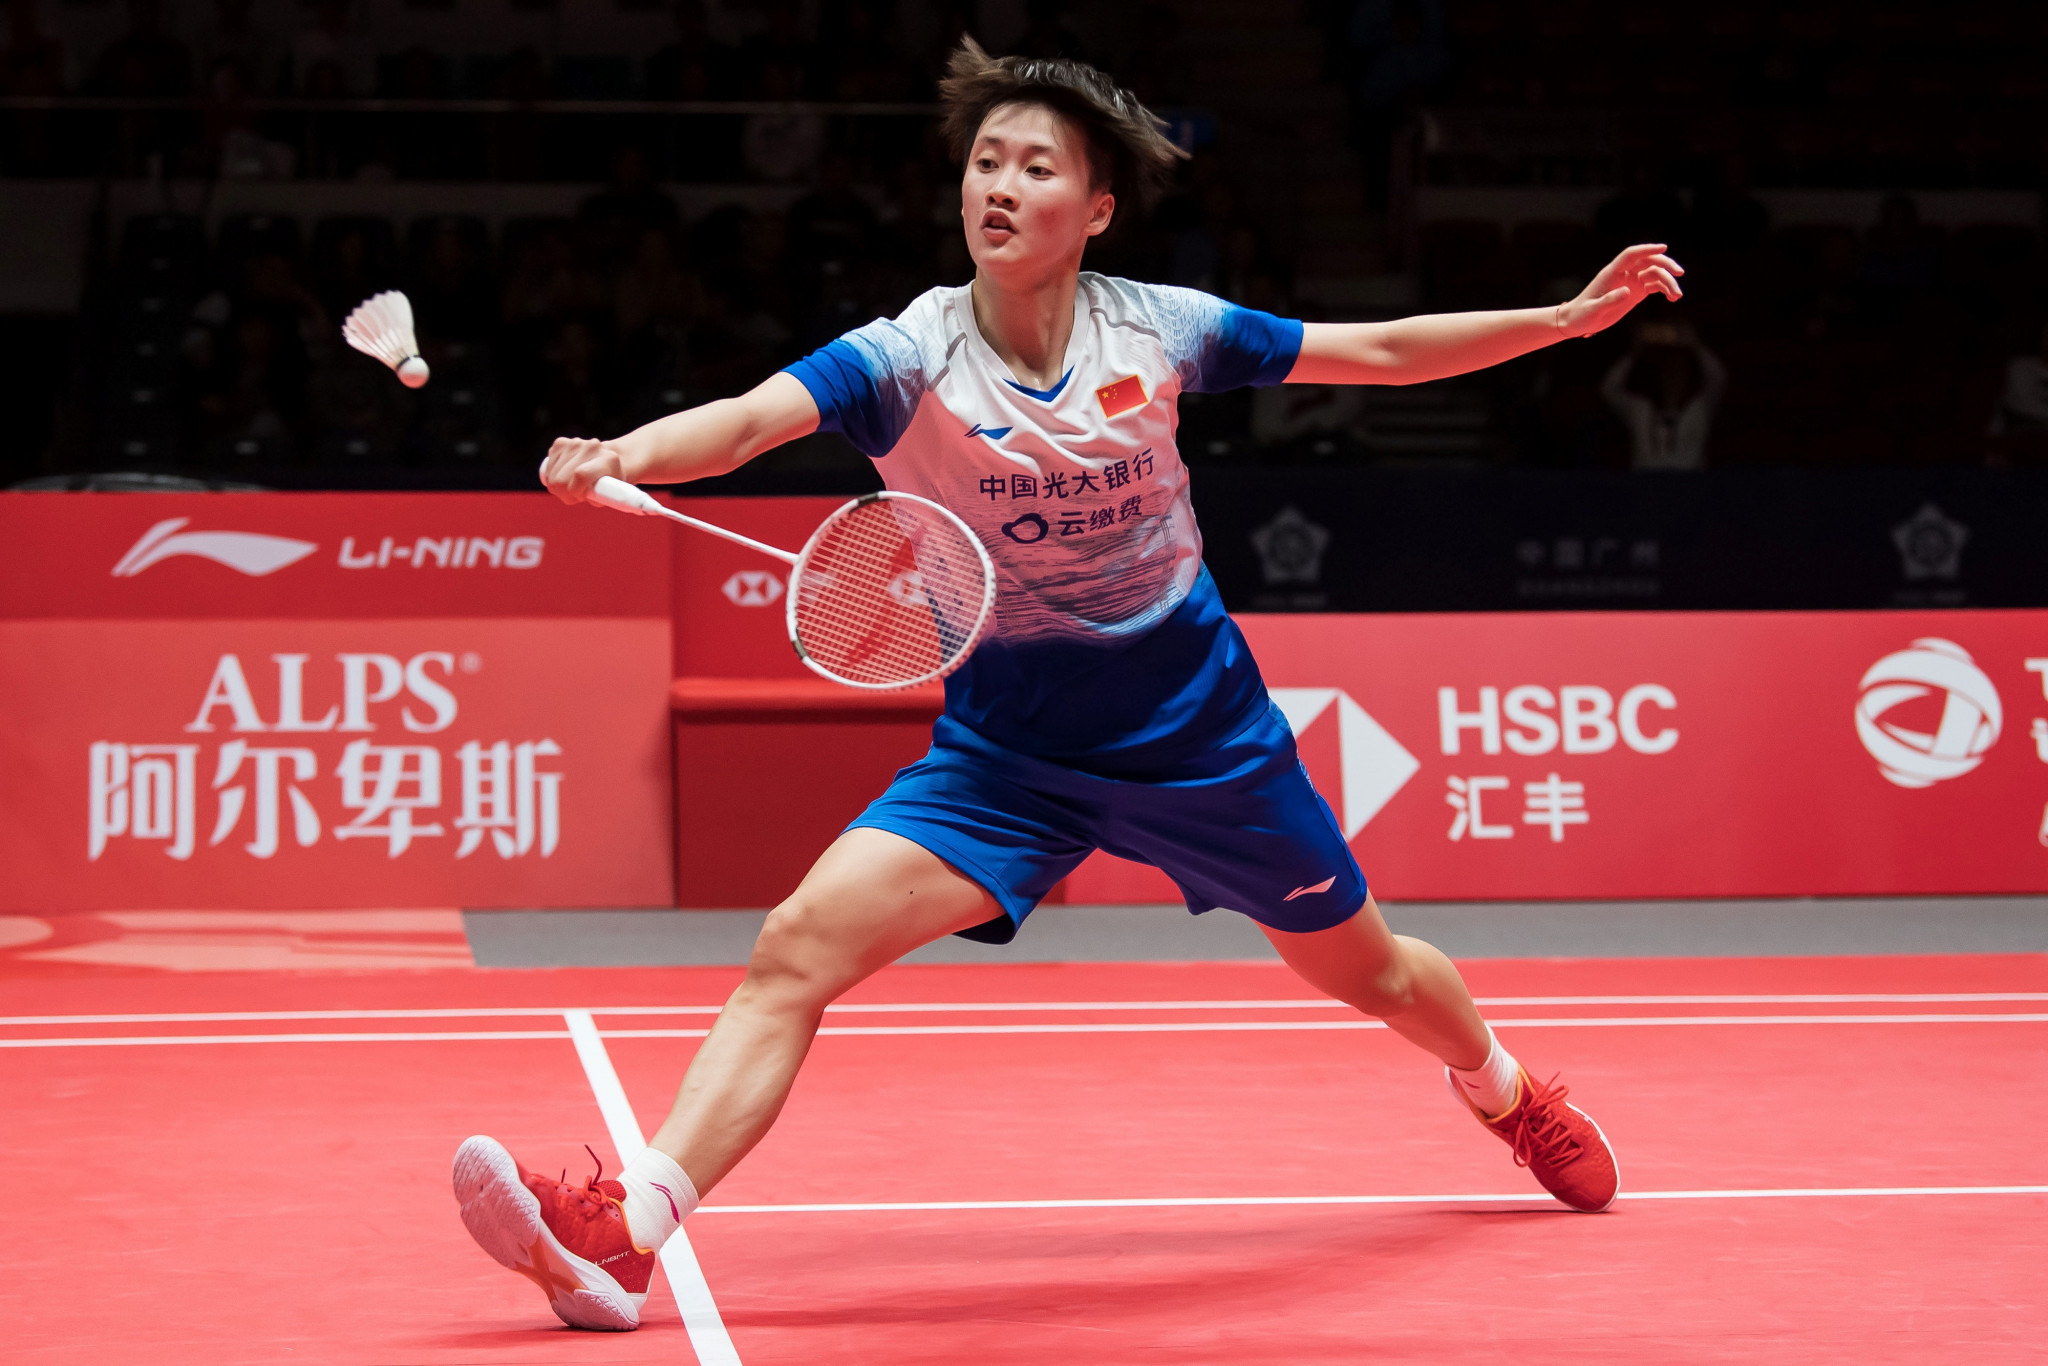 It is thought China will be absent from the BWF World Tour Finals after withdrawing from the two qualifying events beforehand ©Getty Images